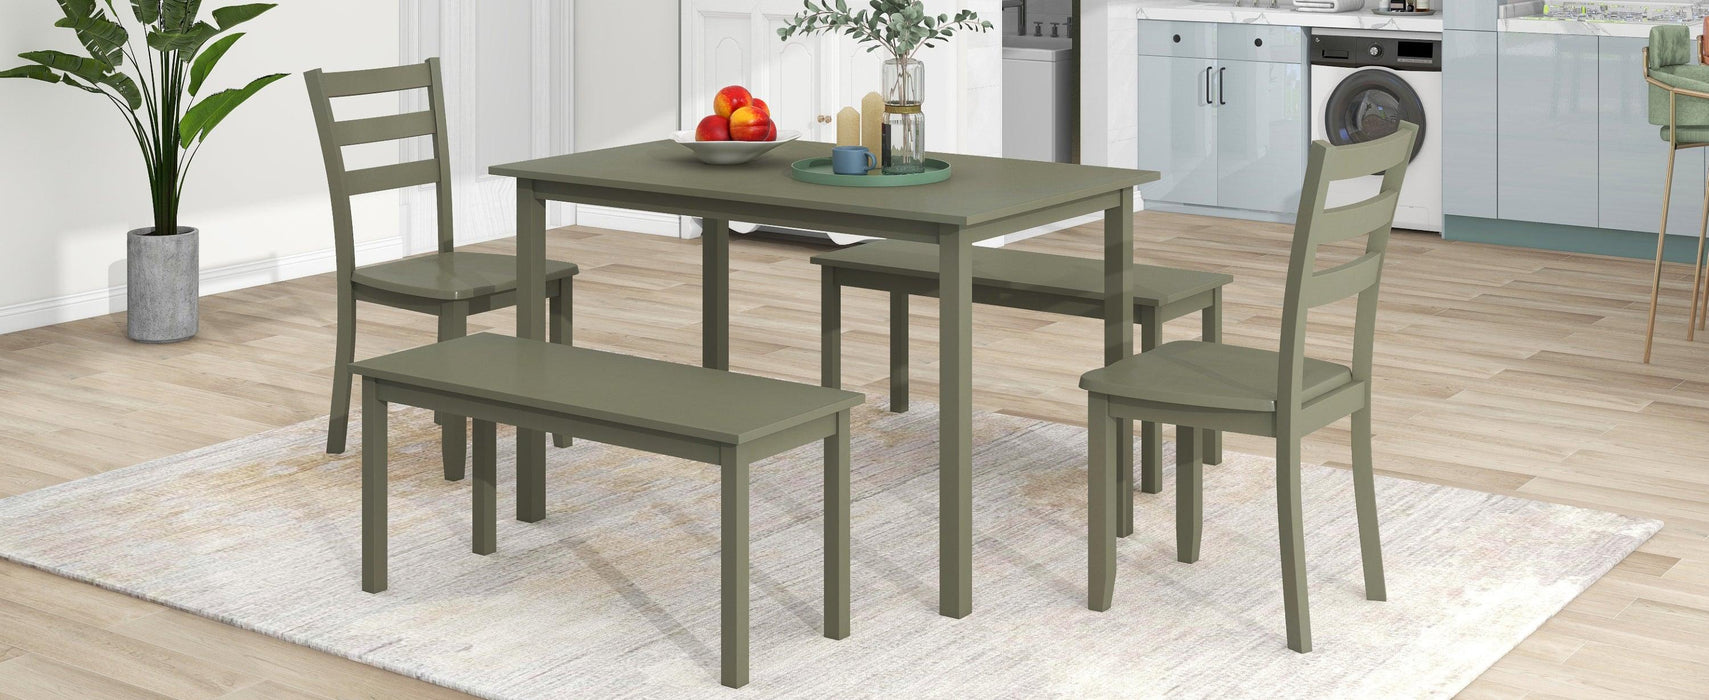 5-piece Wooden Dining Set, Kitchen Table with 2 Dining Chairs and 2 Benches, Farmhouse Rustic Style, Green